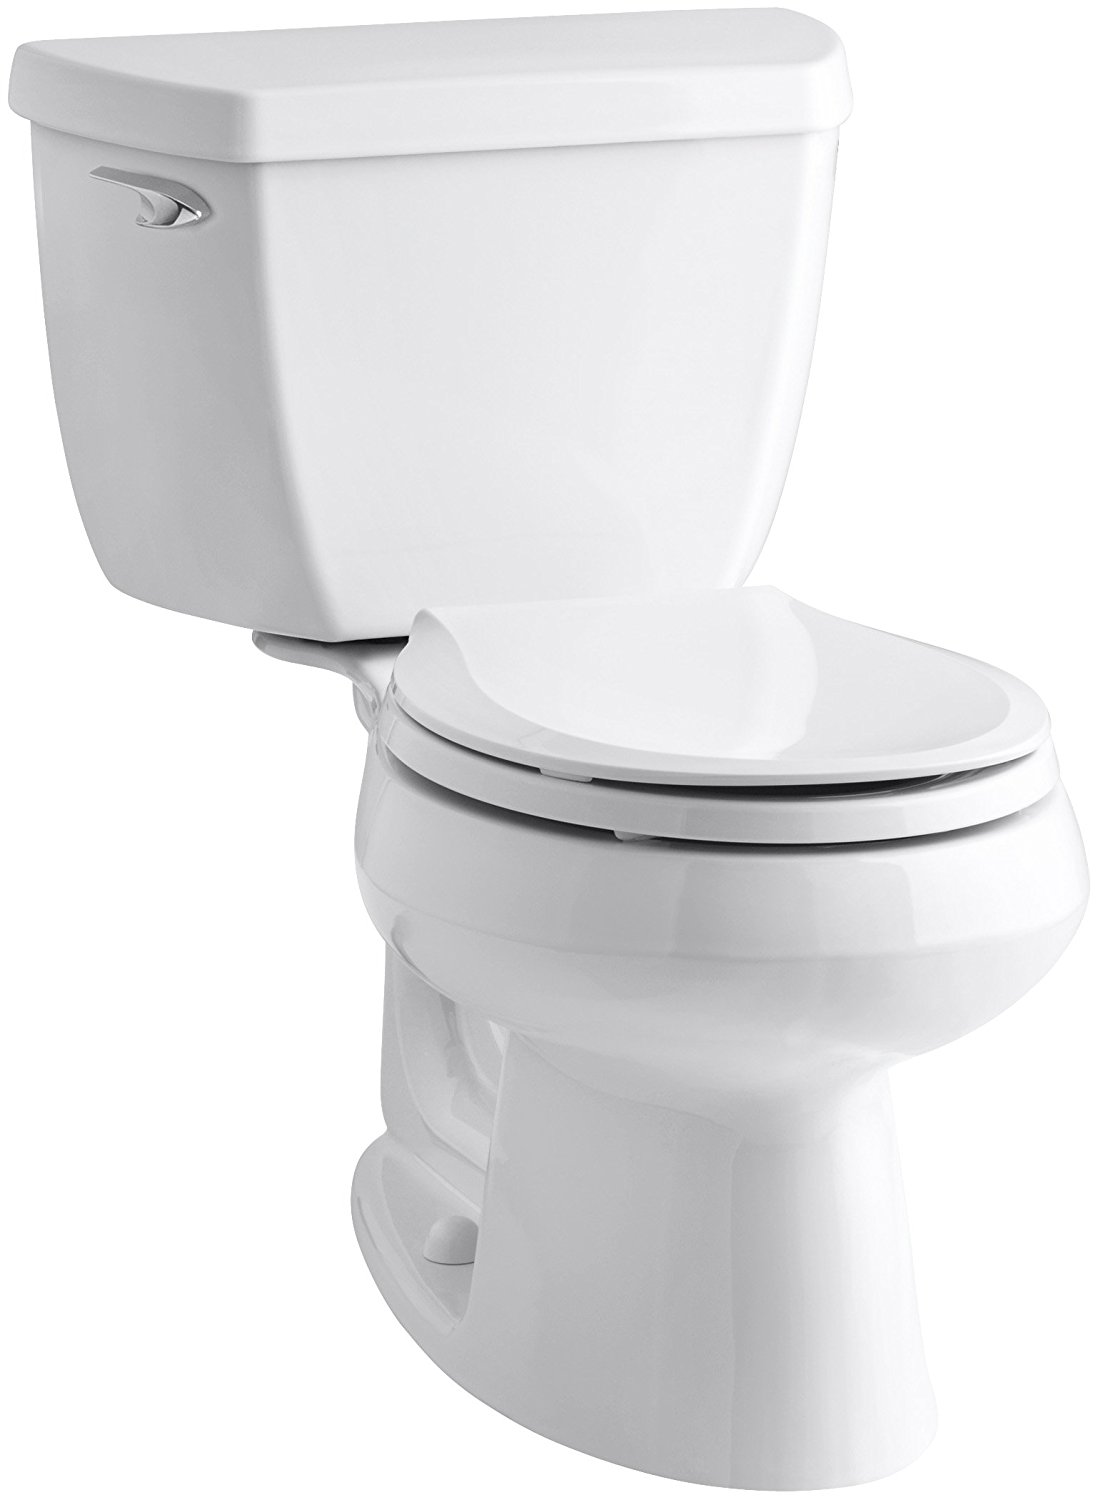 Kohler K-3577-0 Wellworth Classic 1.28 gpf Round-Front Toilet with Class Five Flushing Technology and Left-Hand Trip Lever, White